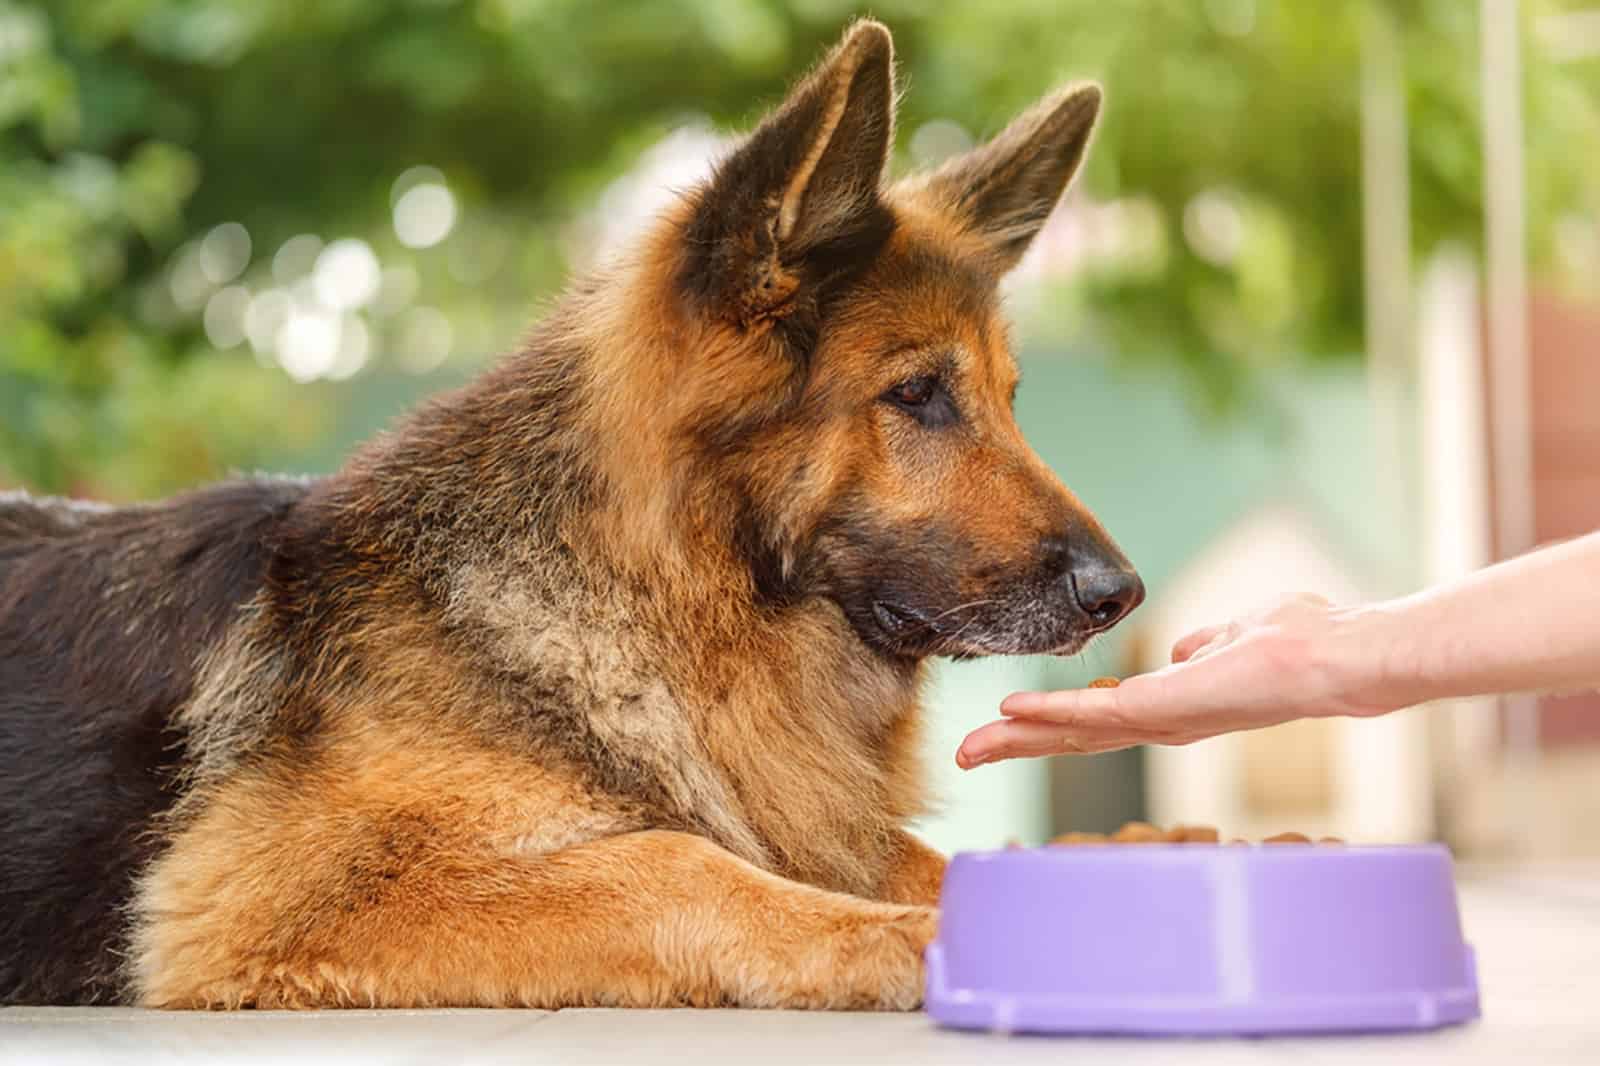 german shepherd dog eating from owners hand outdoors